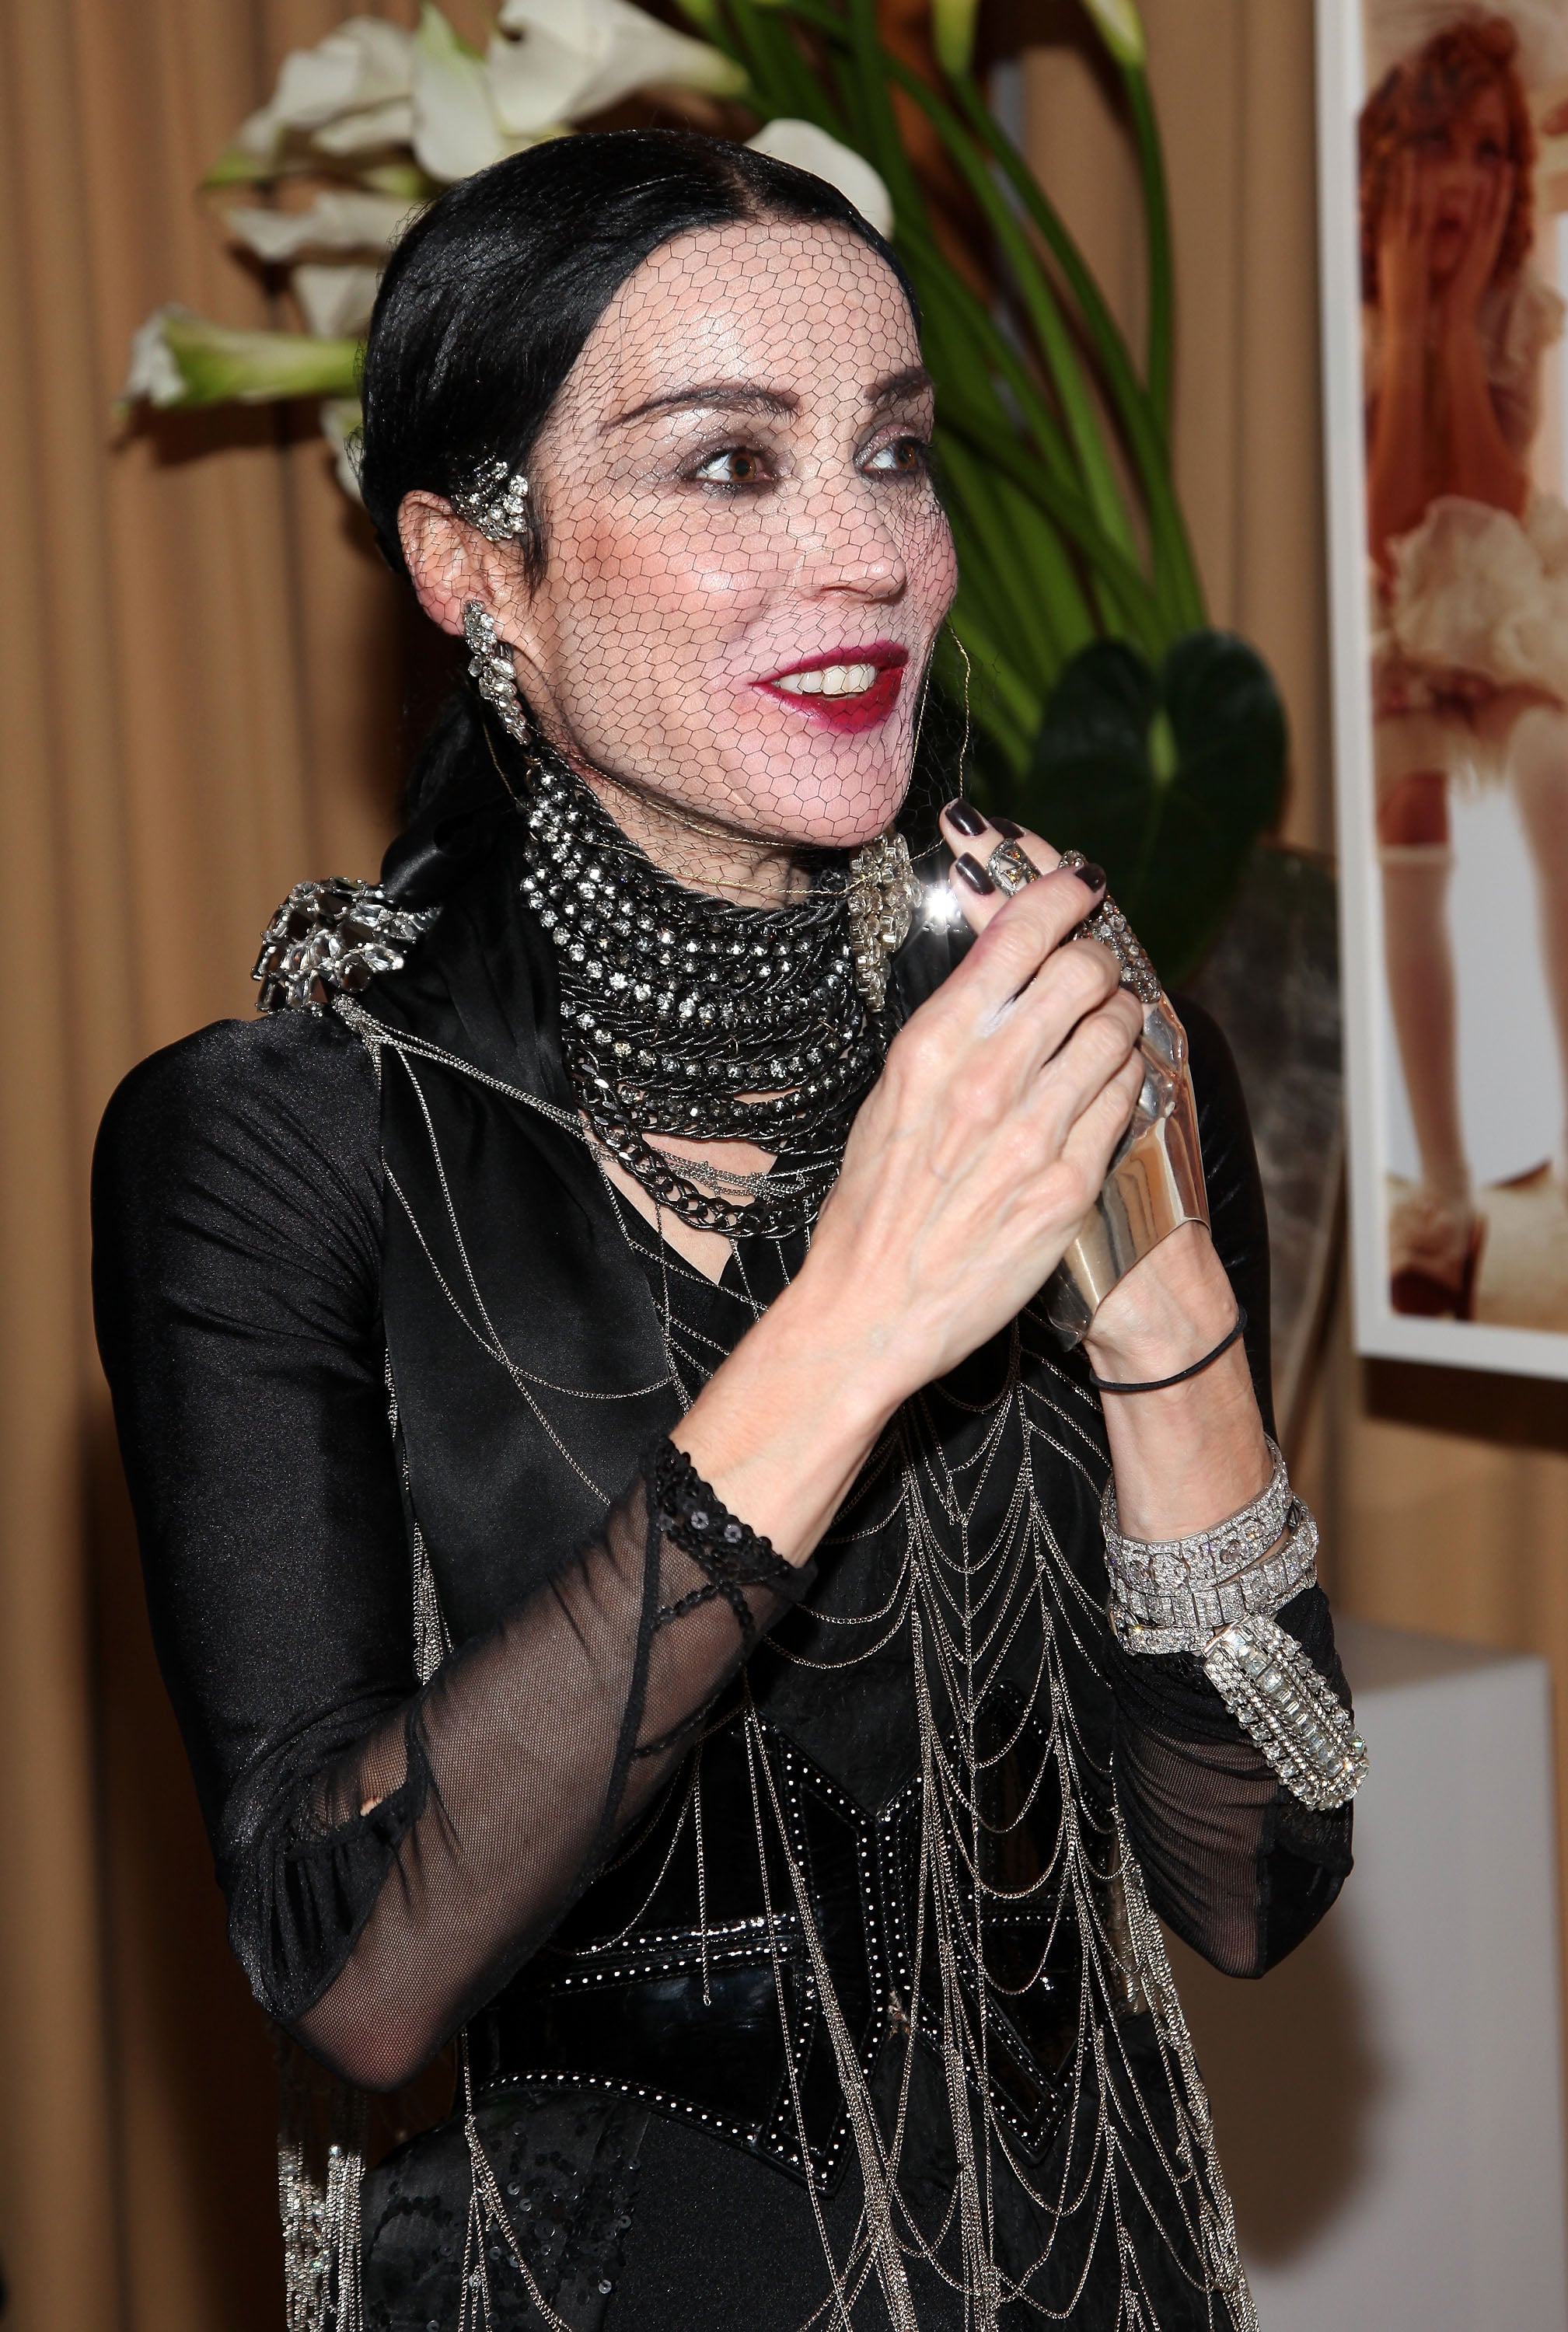 Fashion, Shopping & Style | Daphne Guinness Trades in Skunk-Striped ...